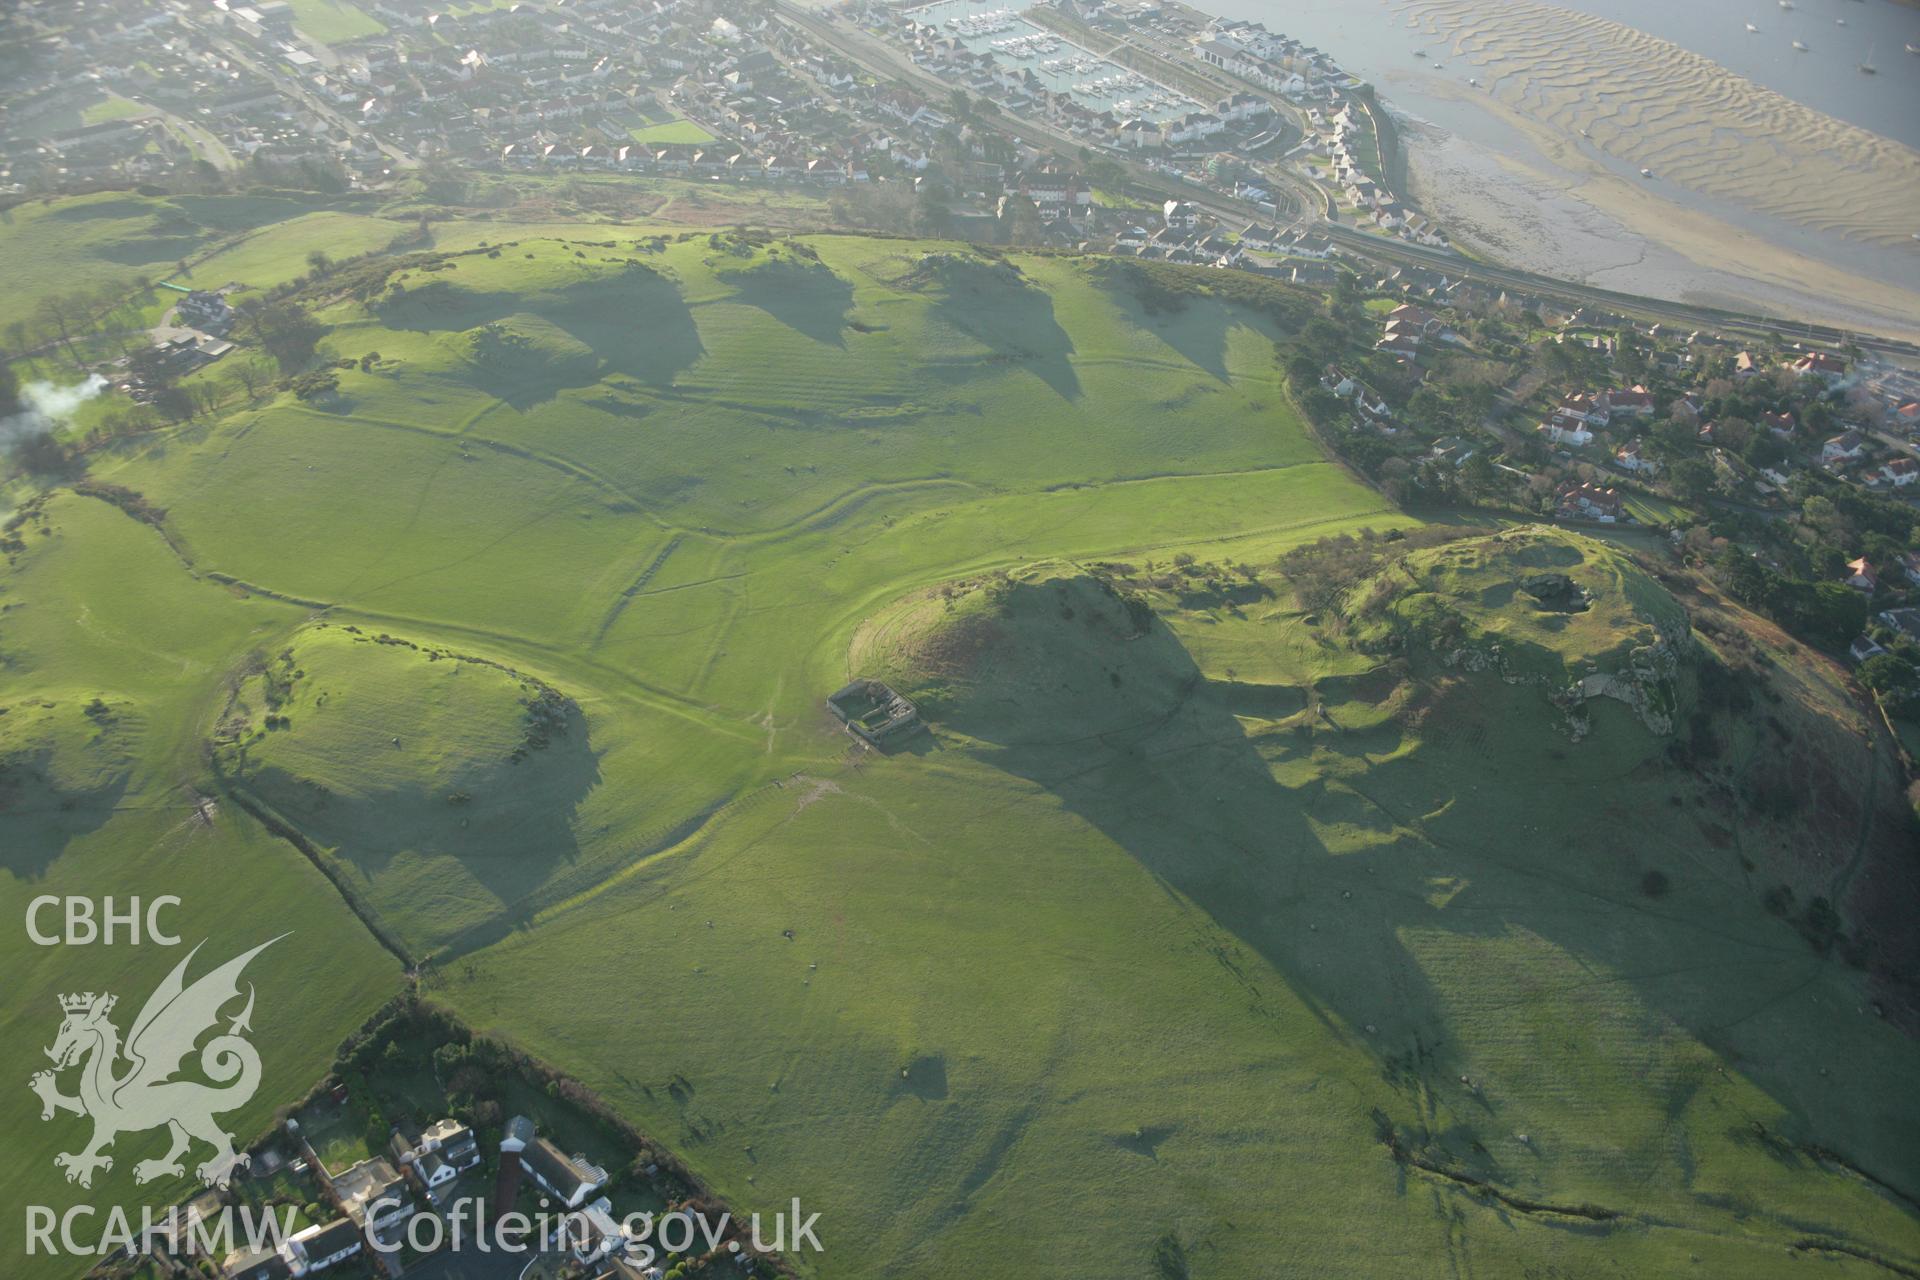 RCAHMW colour oblique aerial photograph of Deganwy Castle. Taken on 25 January 2007 by Toby Driver